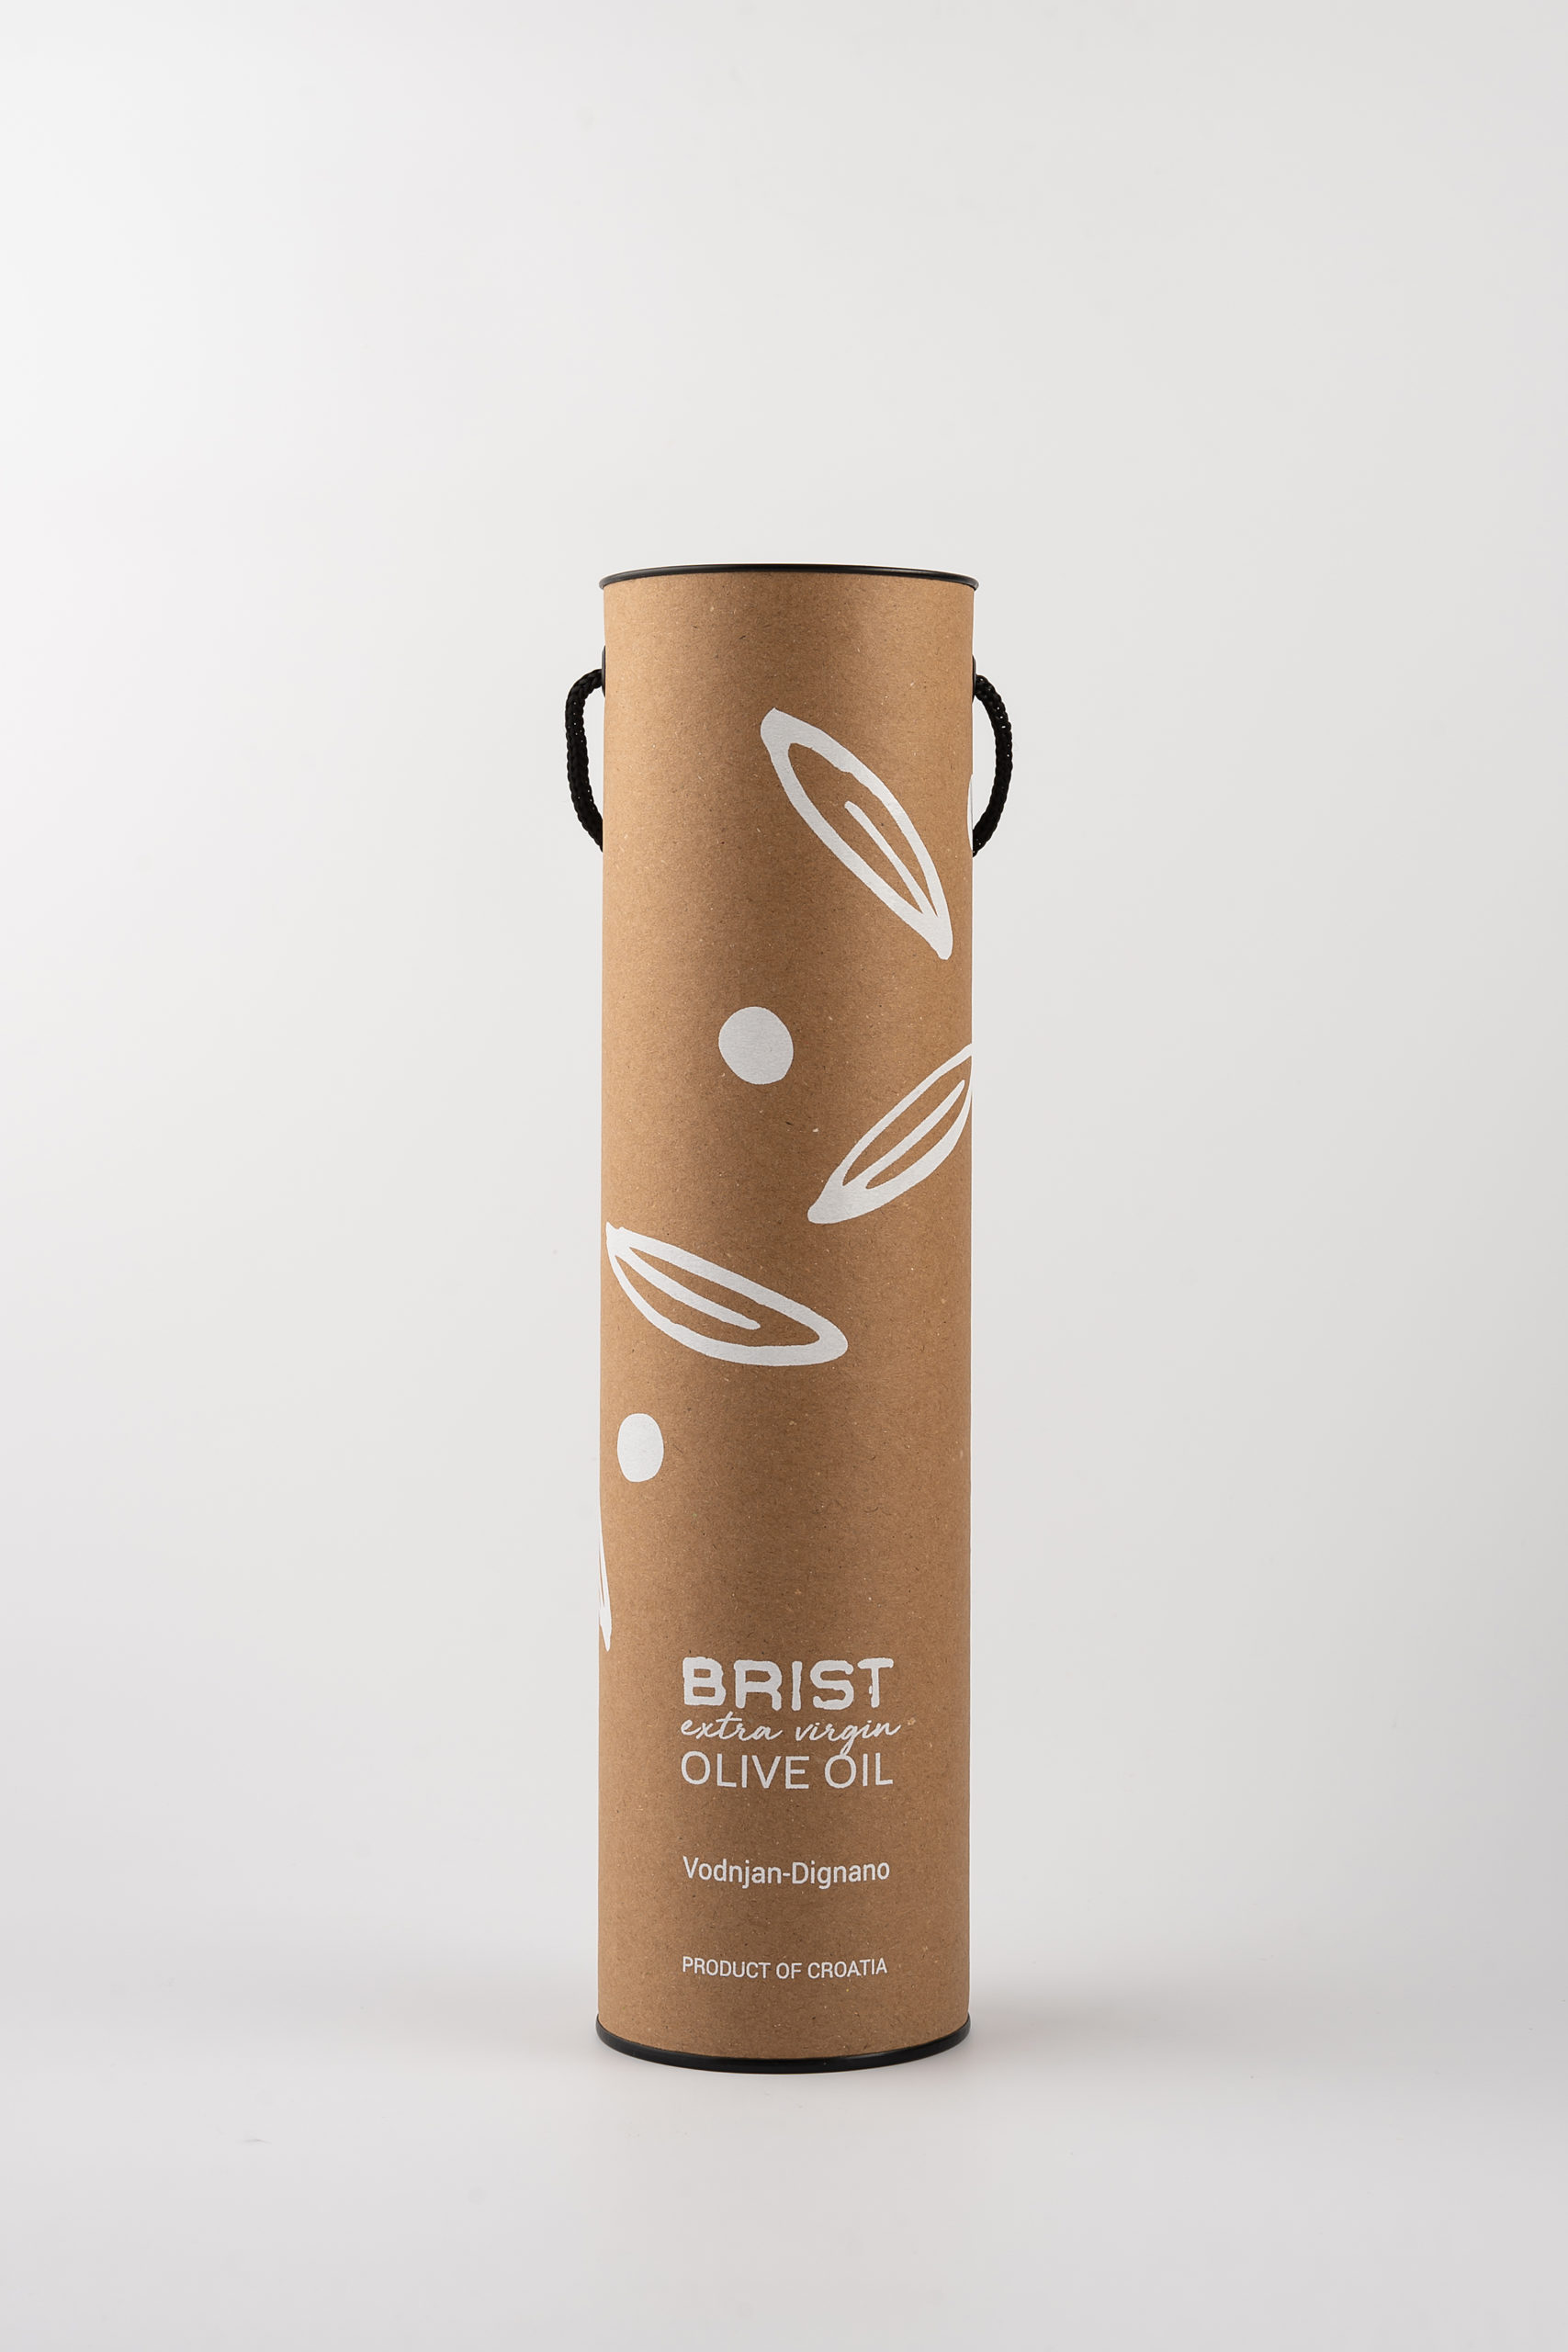 hren | plethora of creativity // Brist Olive Oil product photography